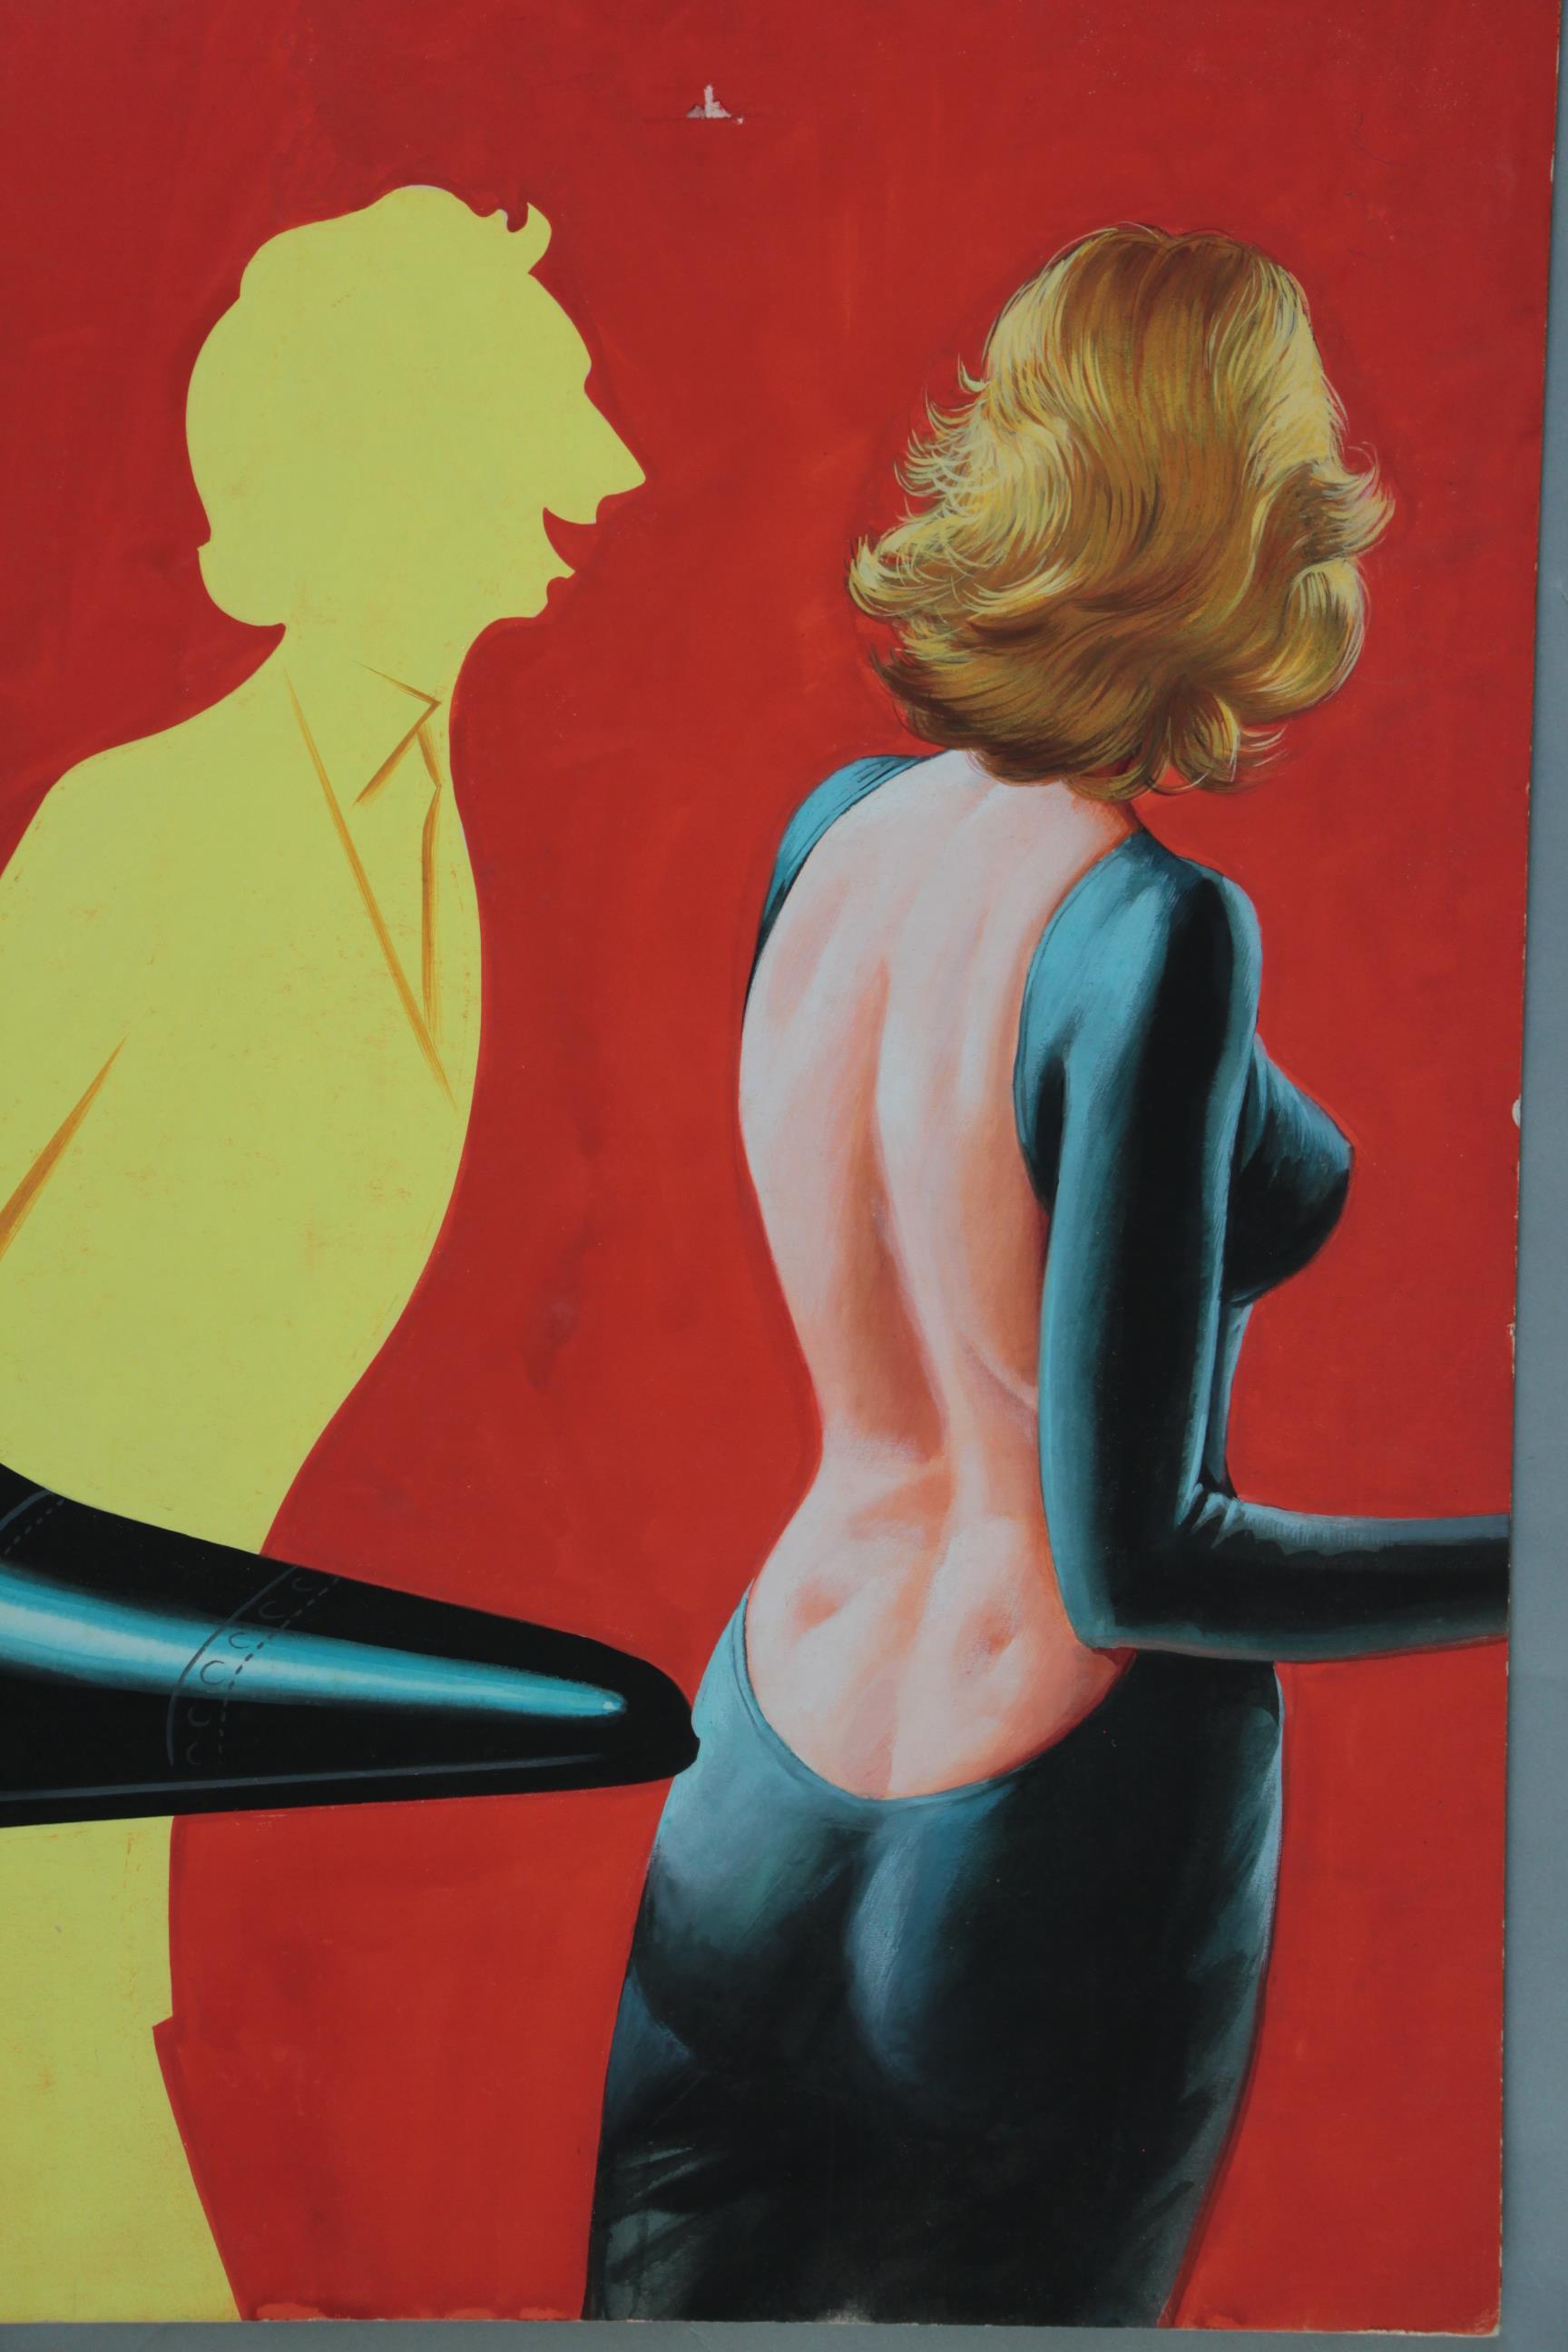 The Tall blonde man with the long black shoe original artwork for the film poster painted on - Image 3 of 4